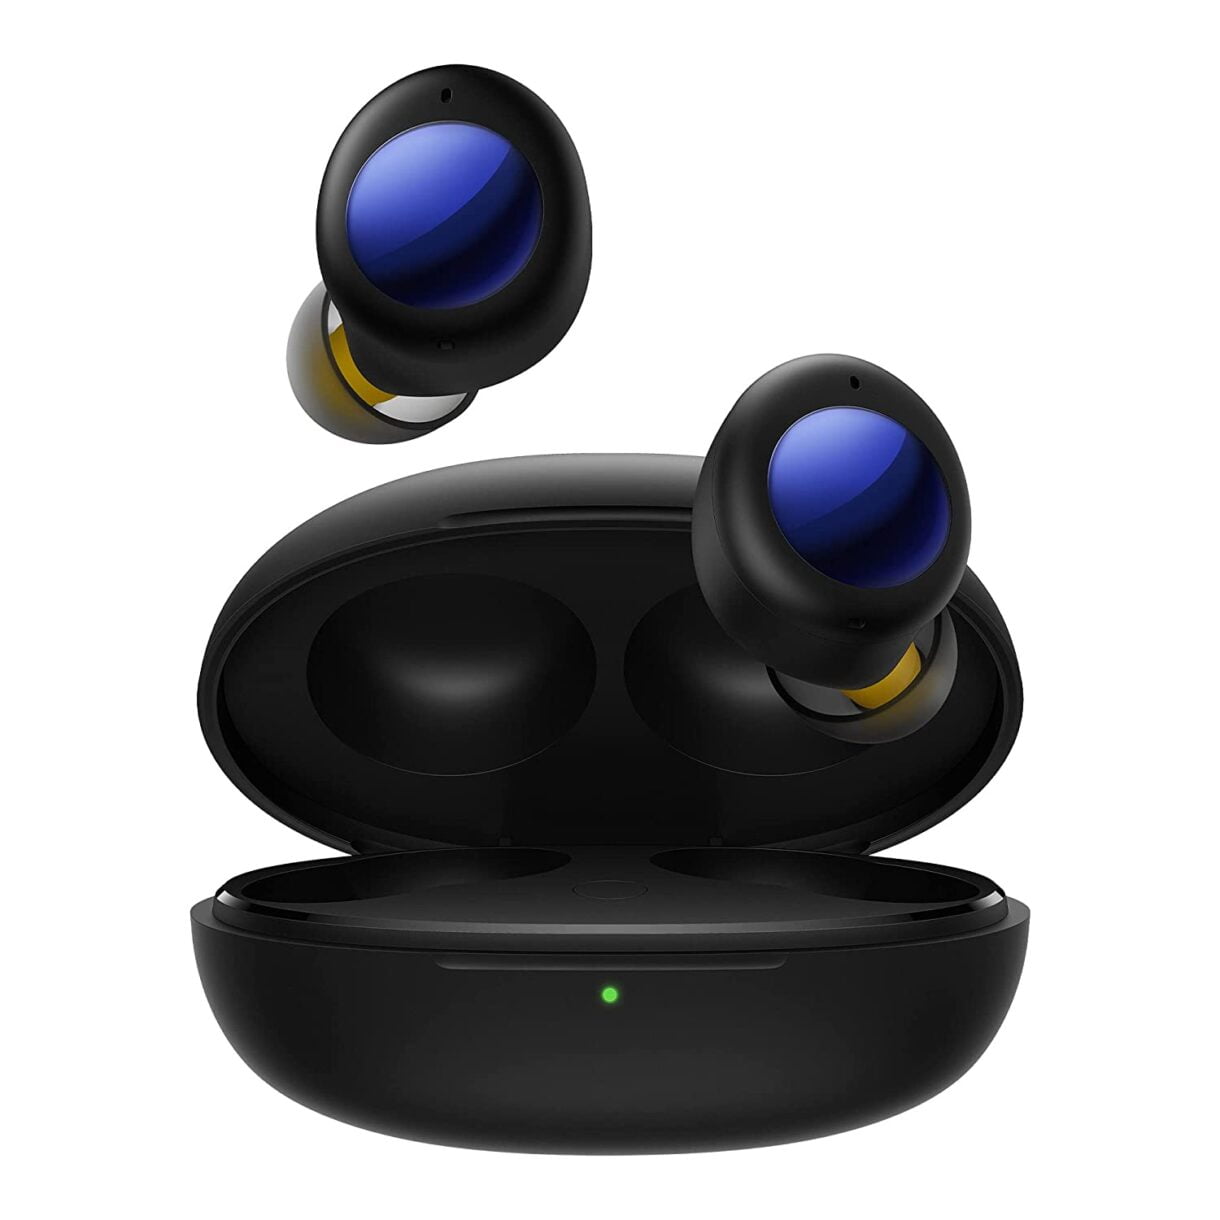 realme Buds Q2 with Active Noise Cancellation (ANC) True Wireless Earbuds